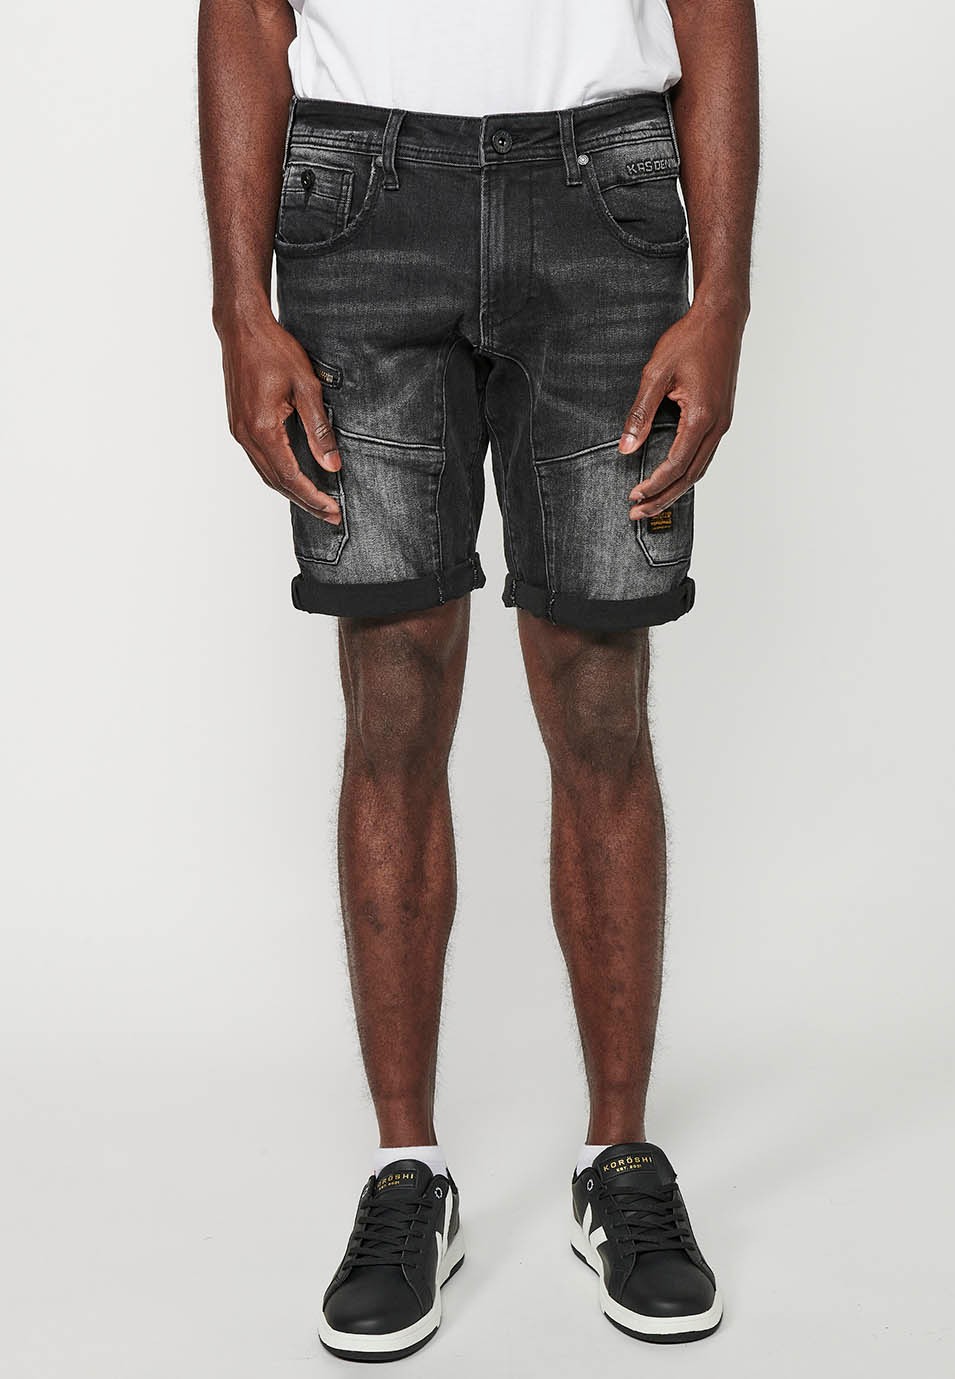 Shorts with Turn-up Finish and Front Closure with Zipper and Button with Five Pockets, One Pocket Pocket and Front Details in Black for Men 4